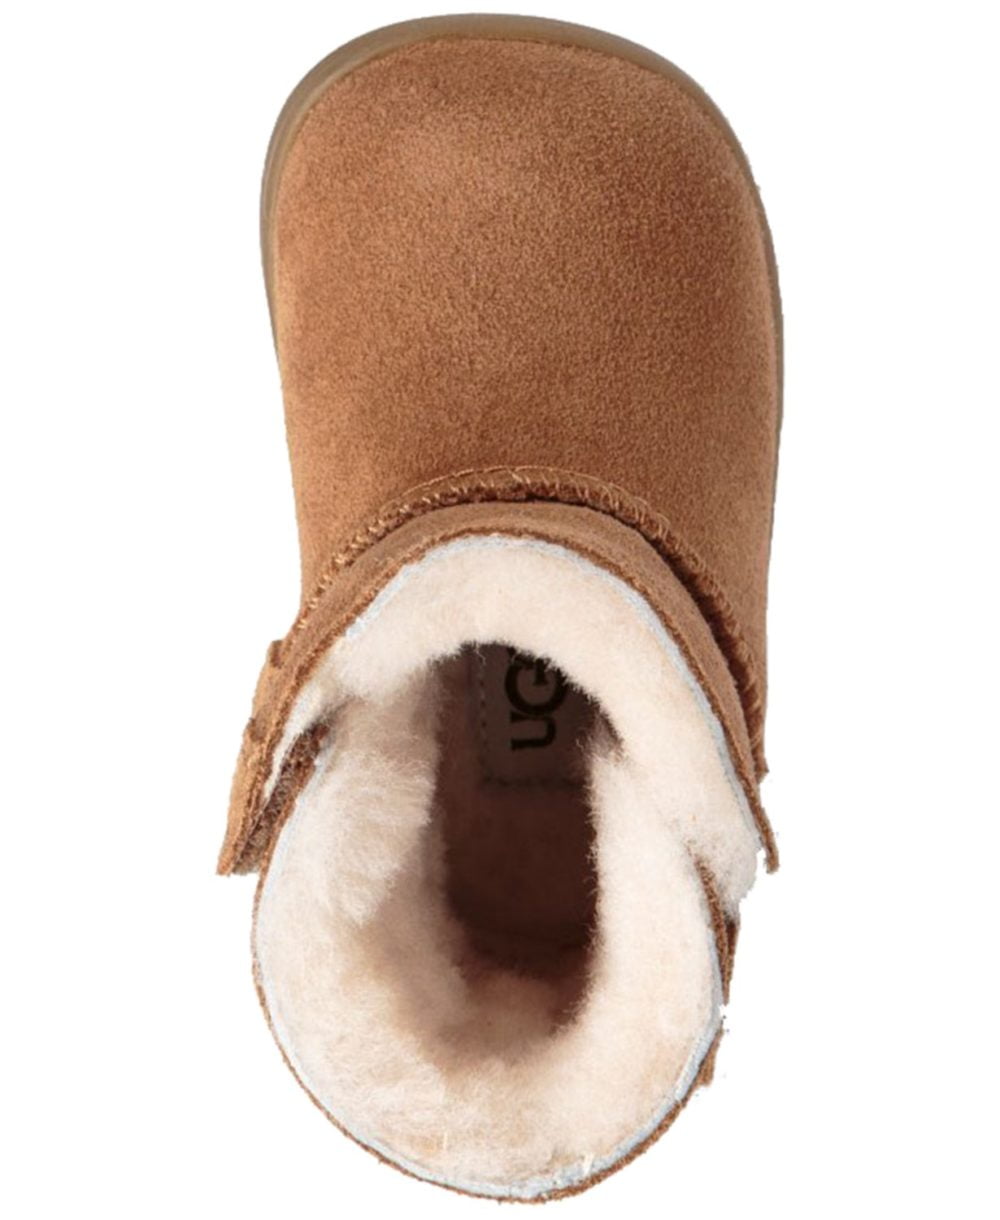 www.couturepoint.com-ugg-baby-unisex-brown-suede-keelan-booties